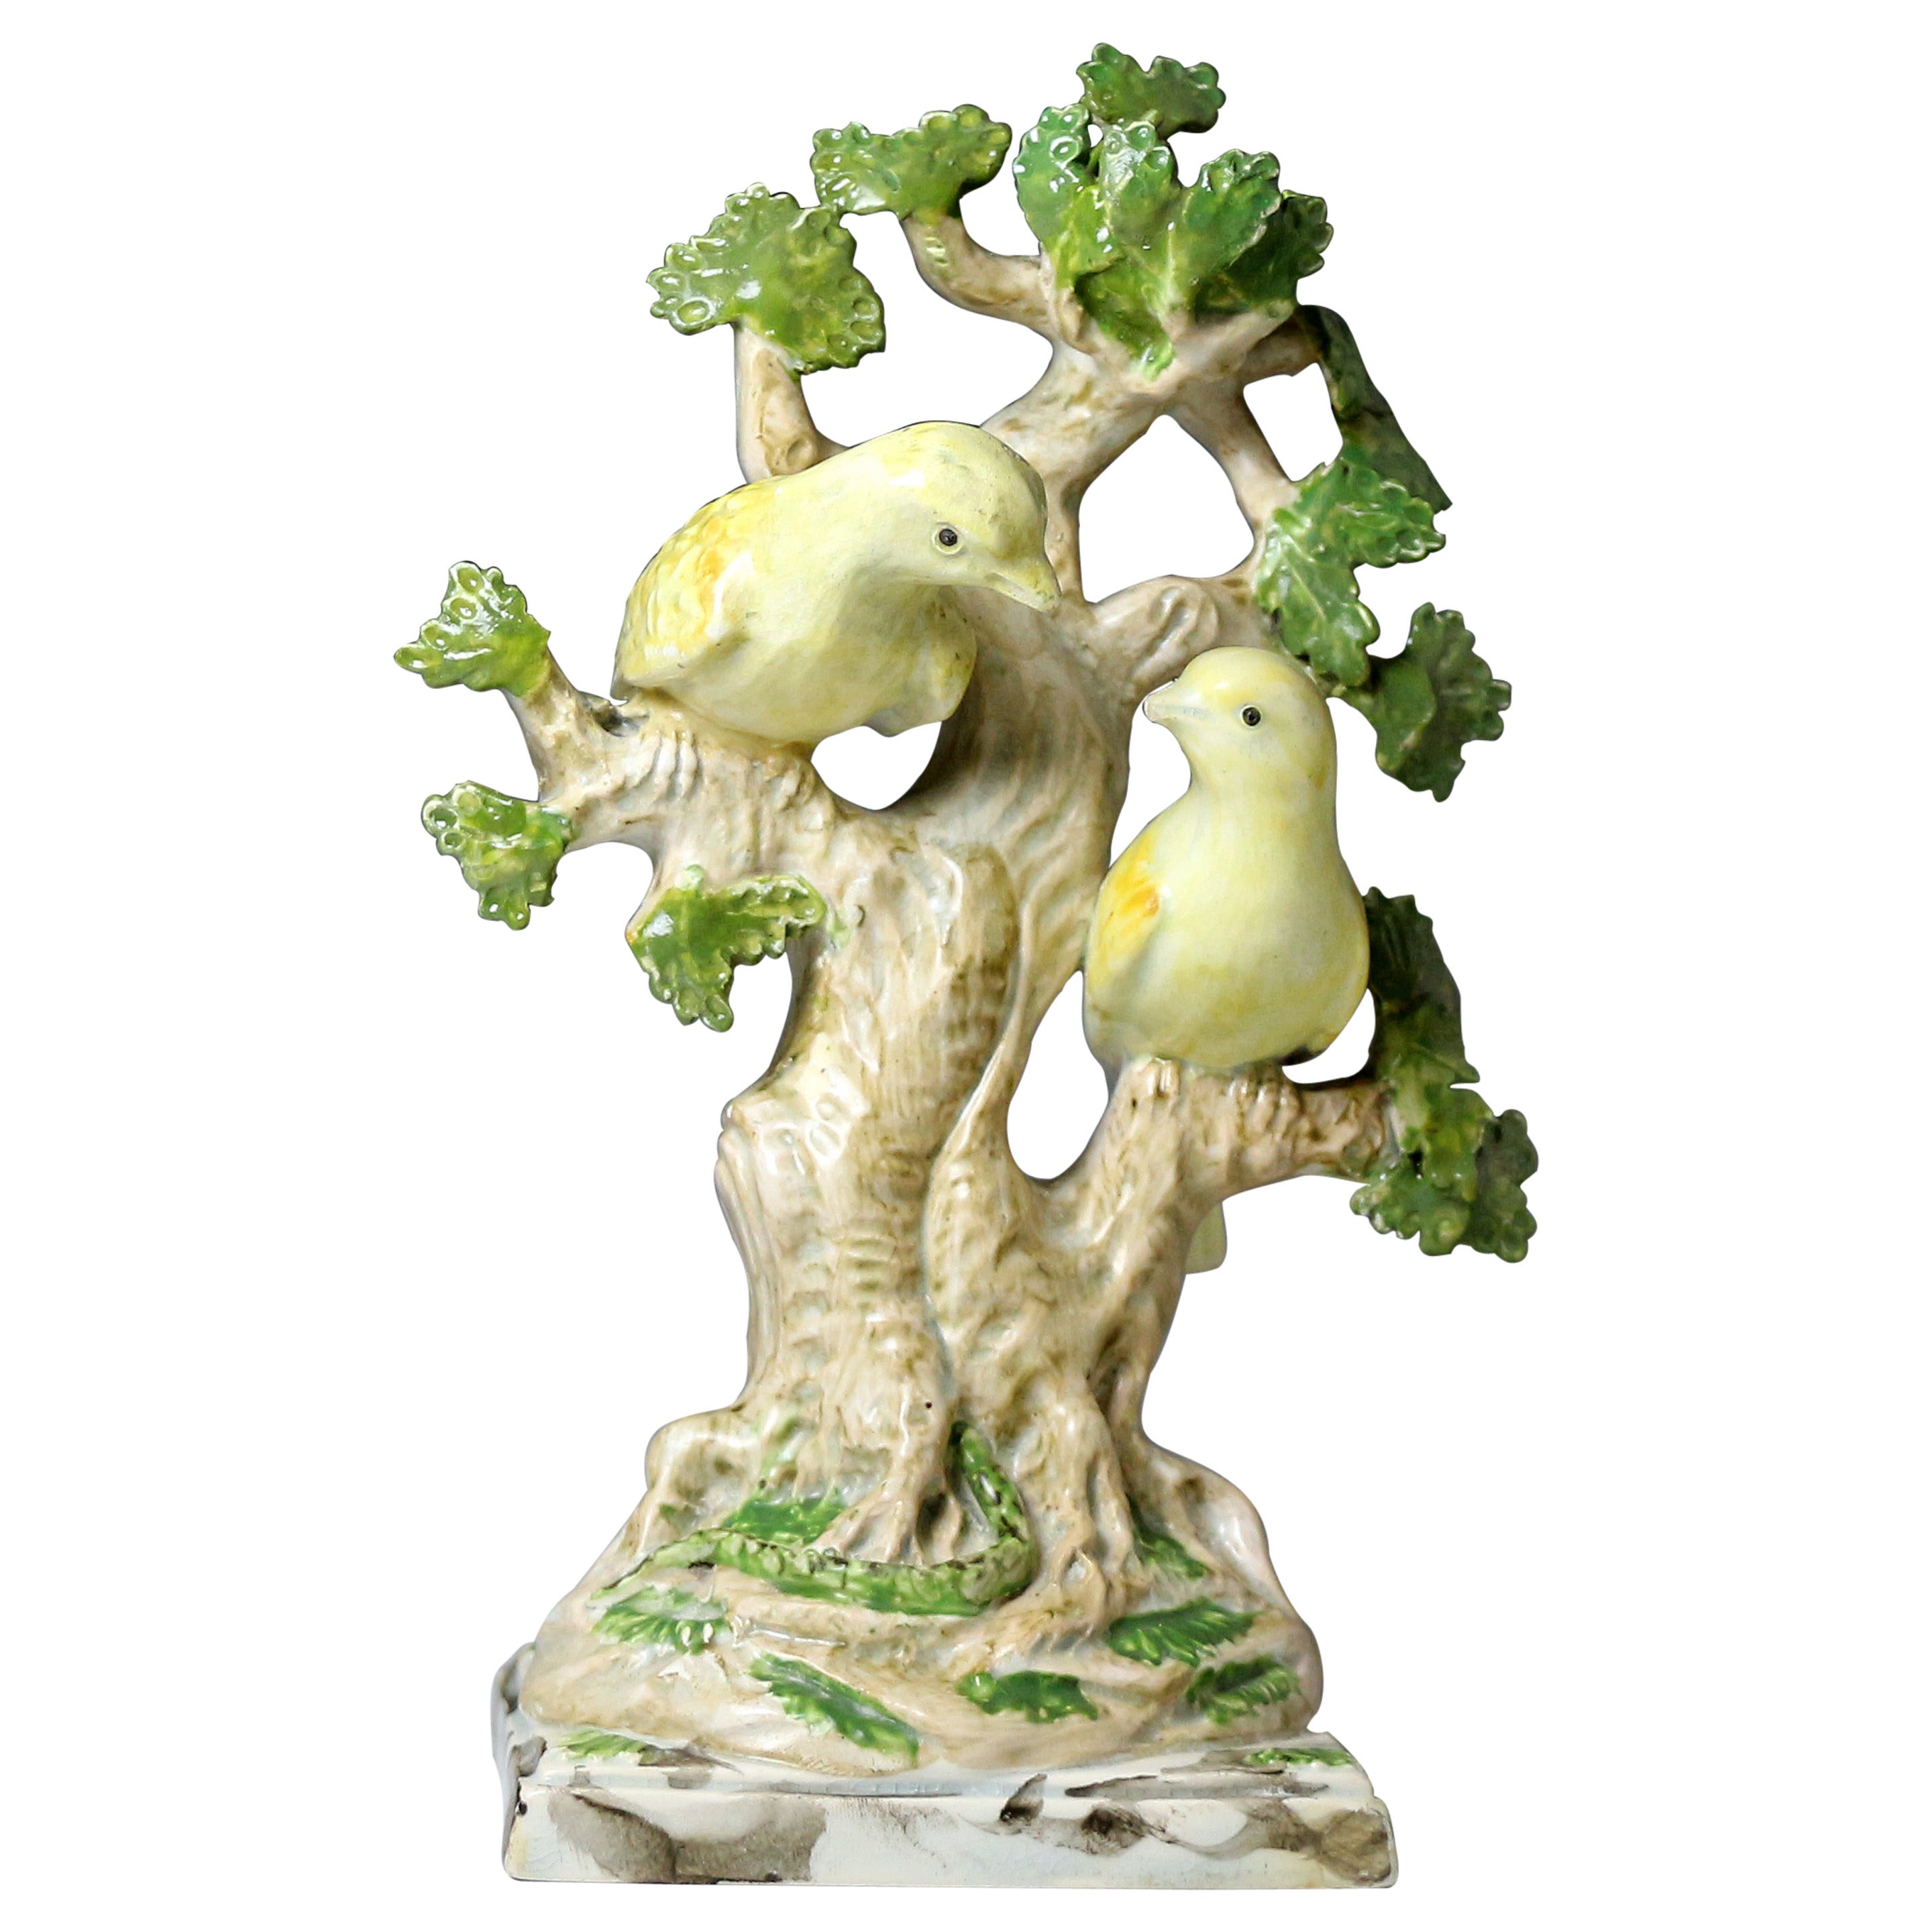 Antique Staffordshire pearlware figure with bcage with birds in branches